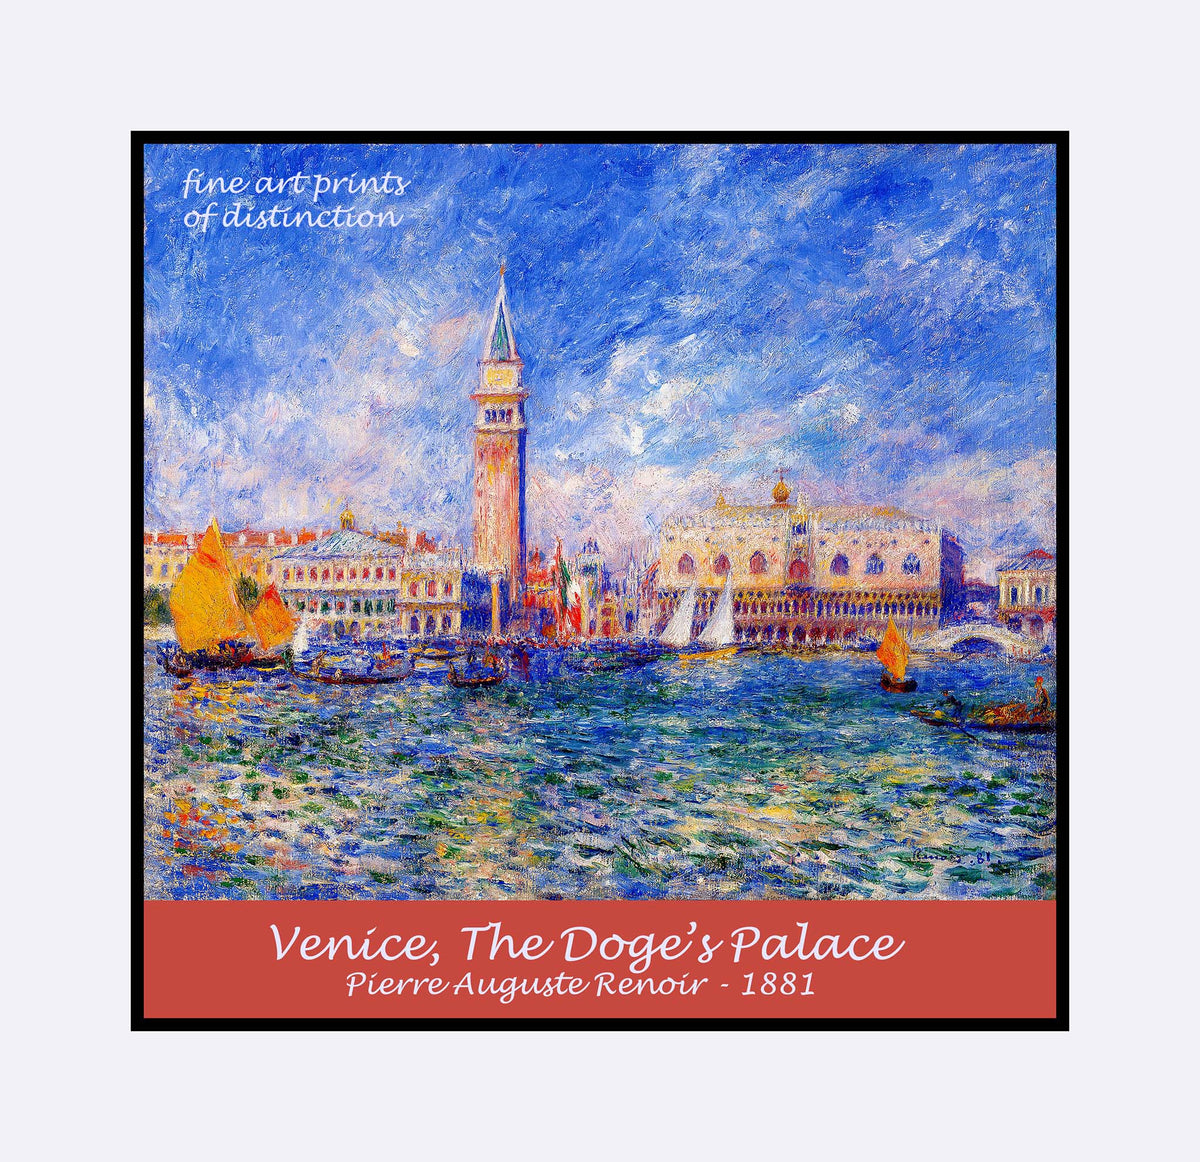 An archival premium Quality art Poster of Venice, The Doge's palace painted by Pierre Auguste Renoir in 1881 for sale by Brandywine General Store